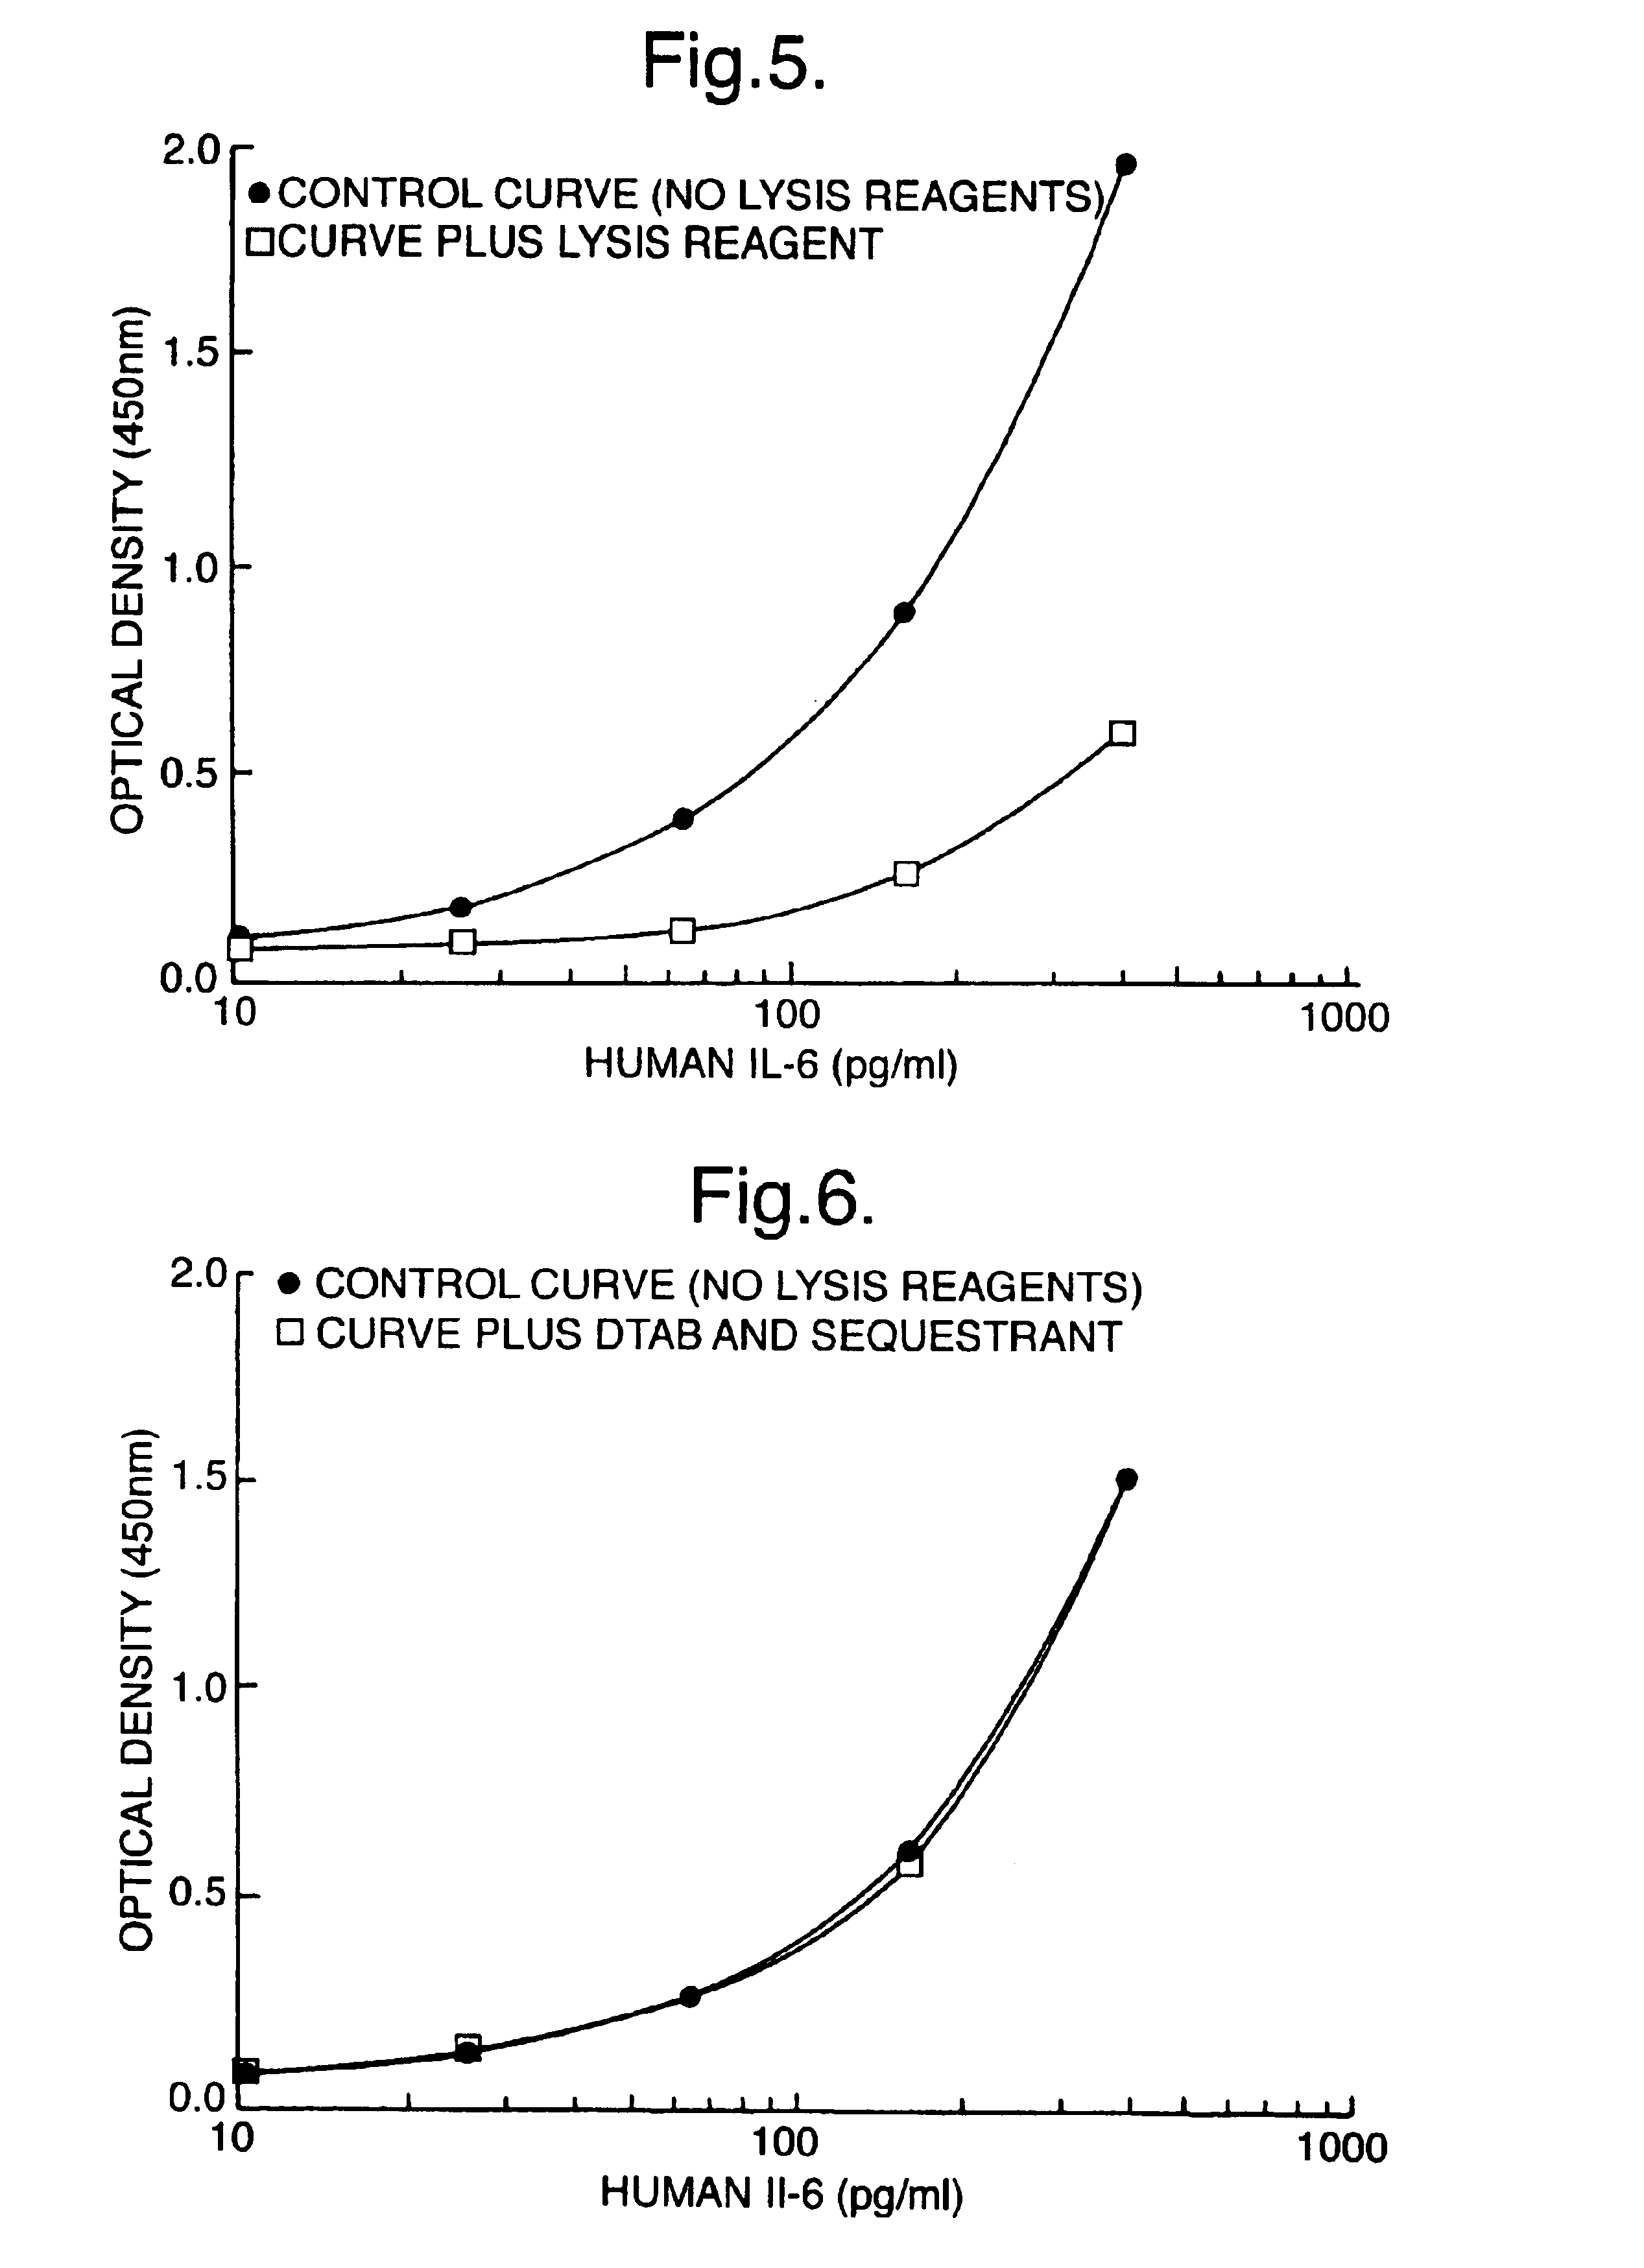 In-situ cell extraction and assay method